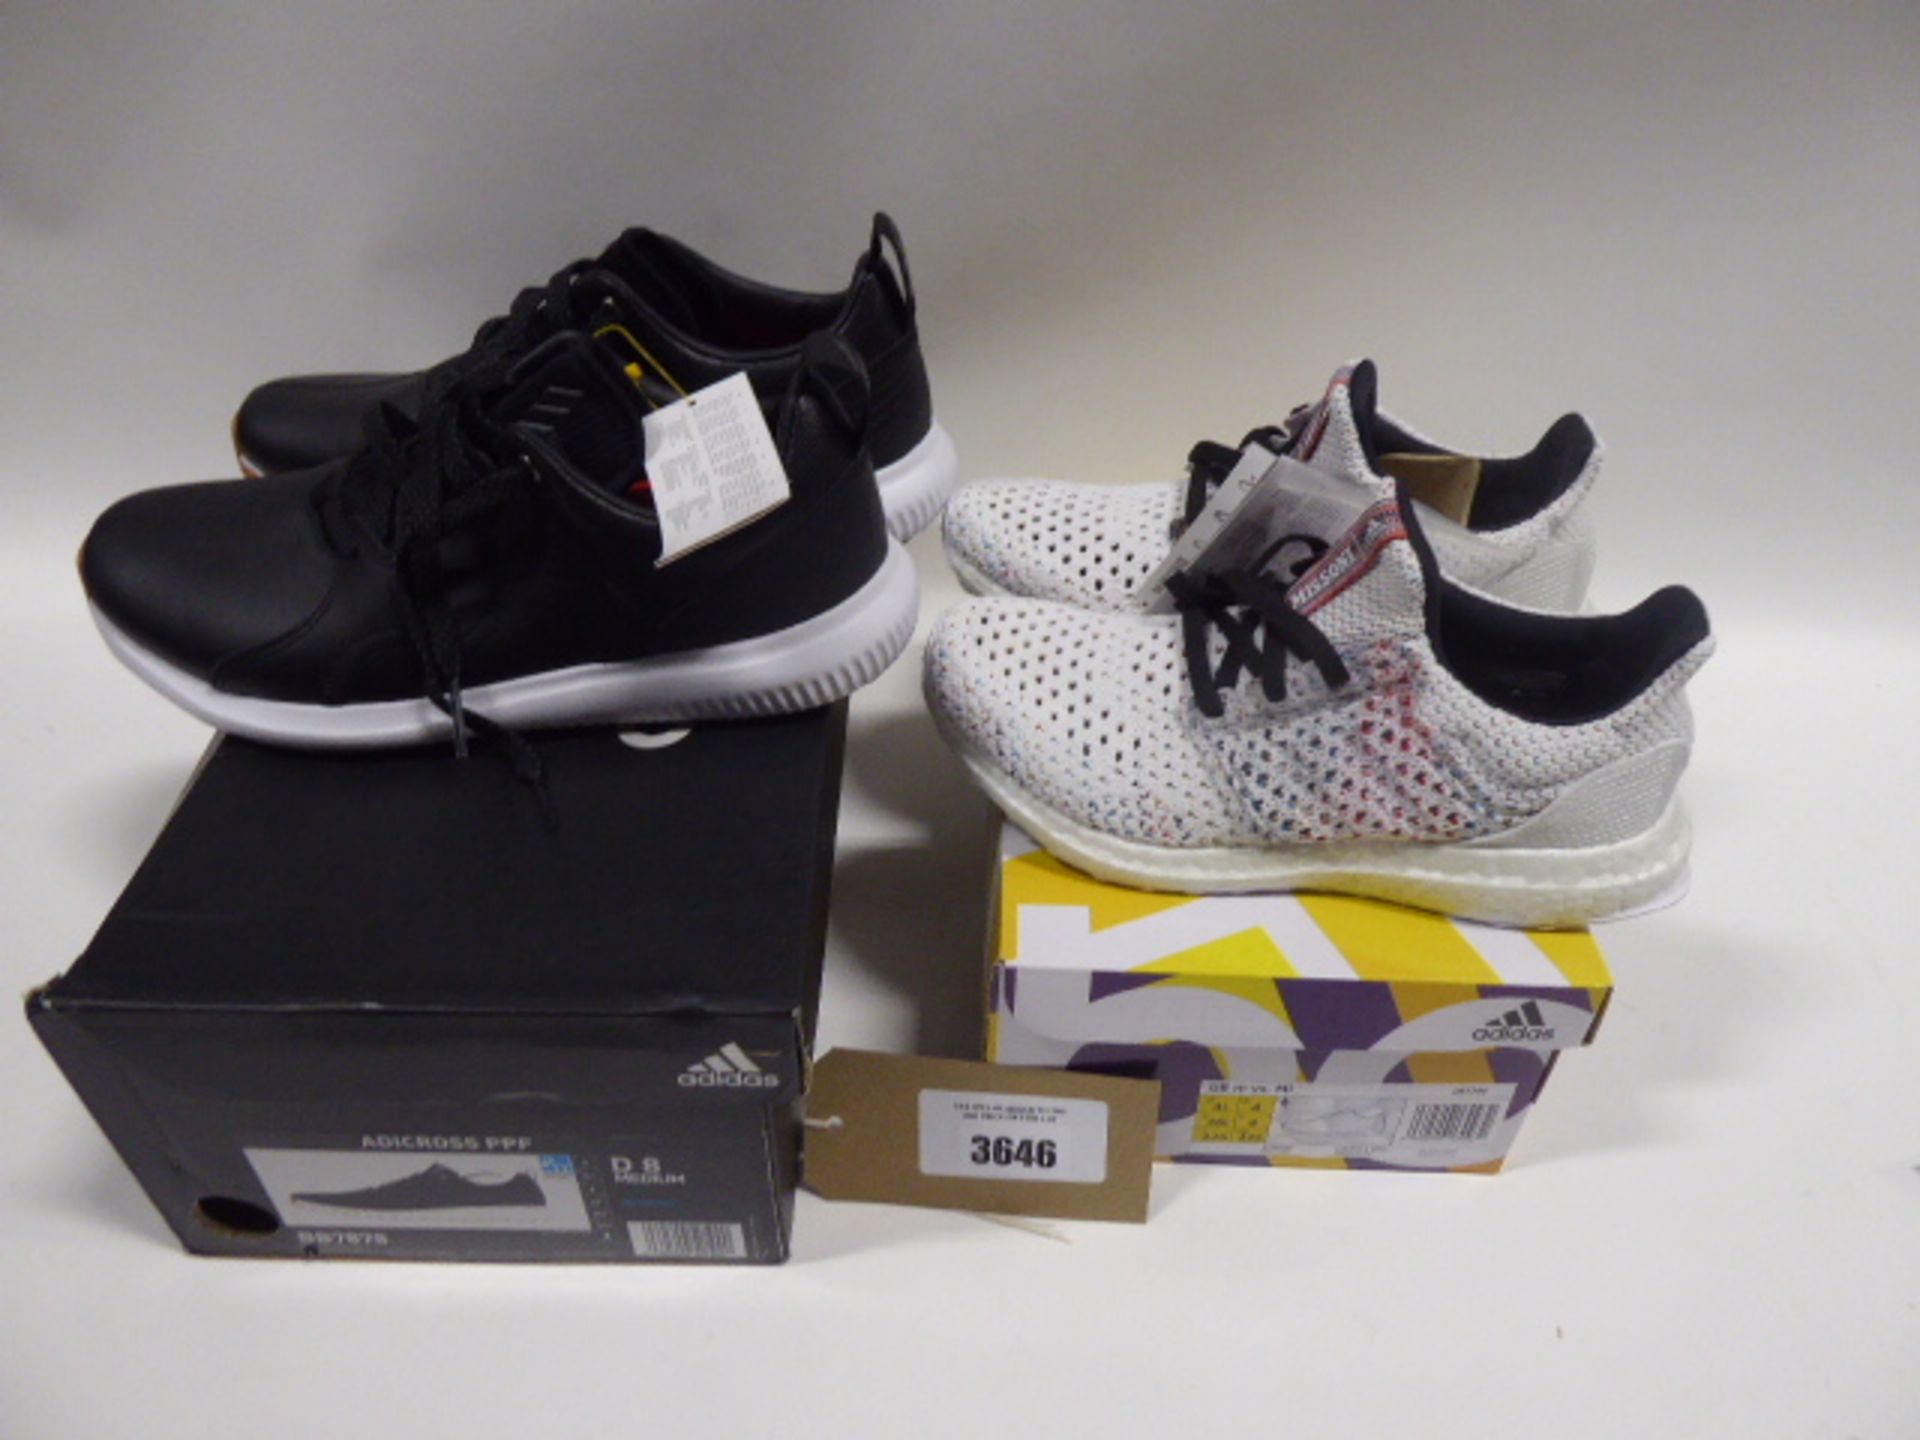 Adidas Adicross PPF size 8 and a pair of Adidas UB m vS Mi trainers size 4